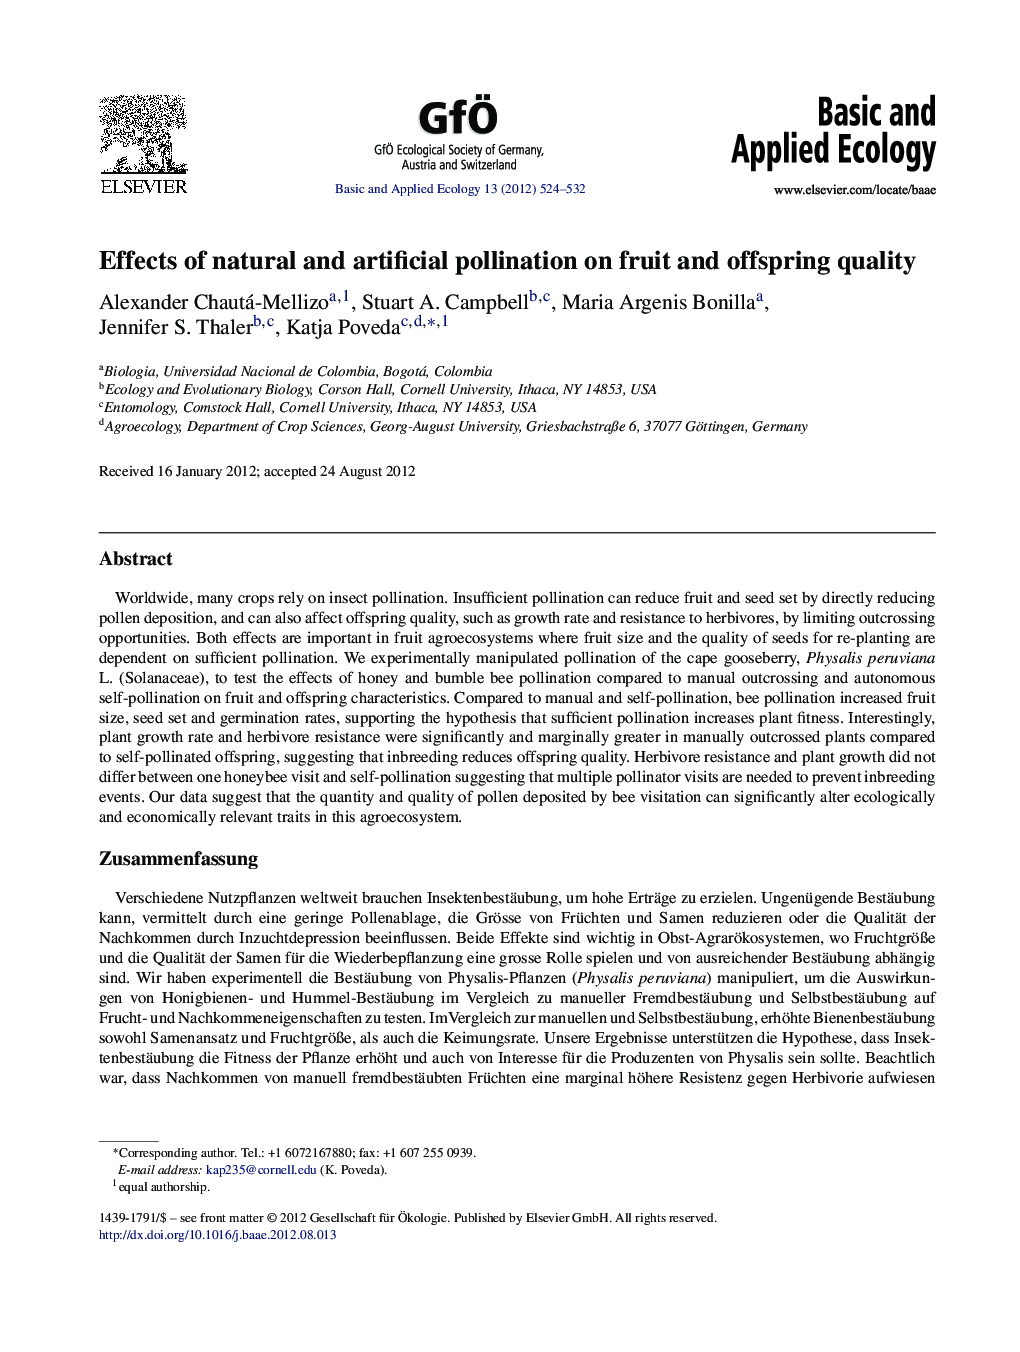 Effects of natural and artificial pollination on fruit and offspring quality